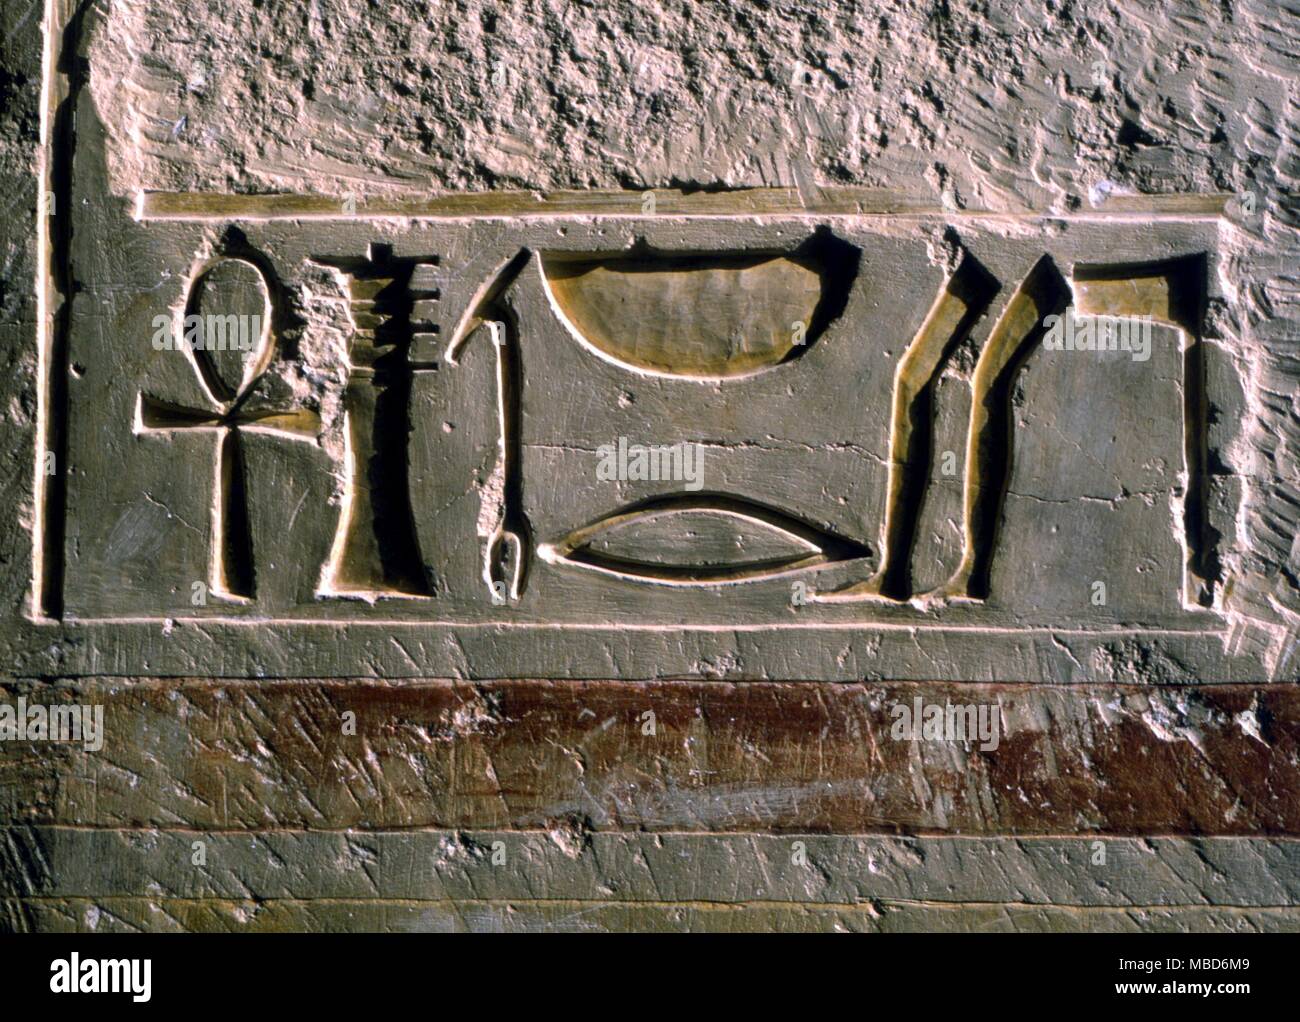 EGYPTIAN MYTHOLOGY - Hieroglyphics from the funerary temple of Queen Hapshepsut, near Luxor Stock Photo